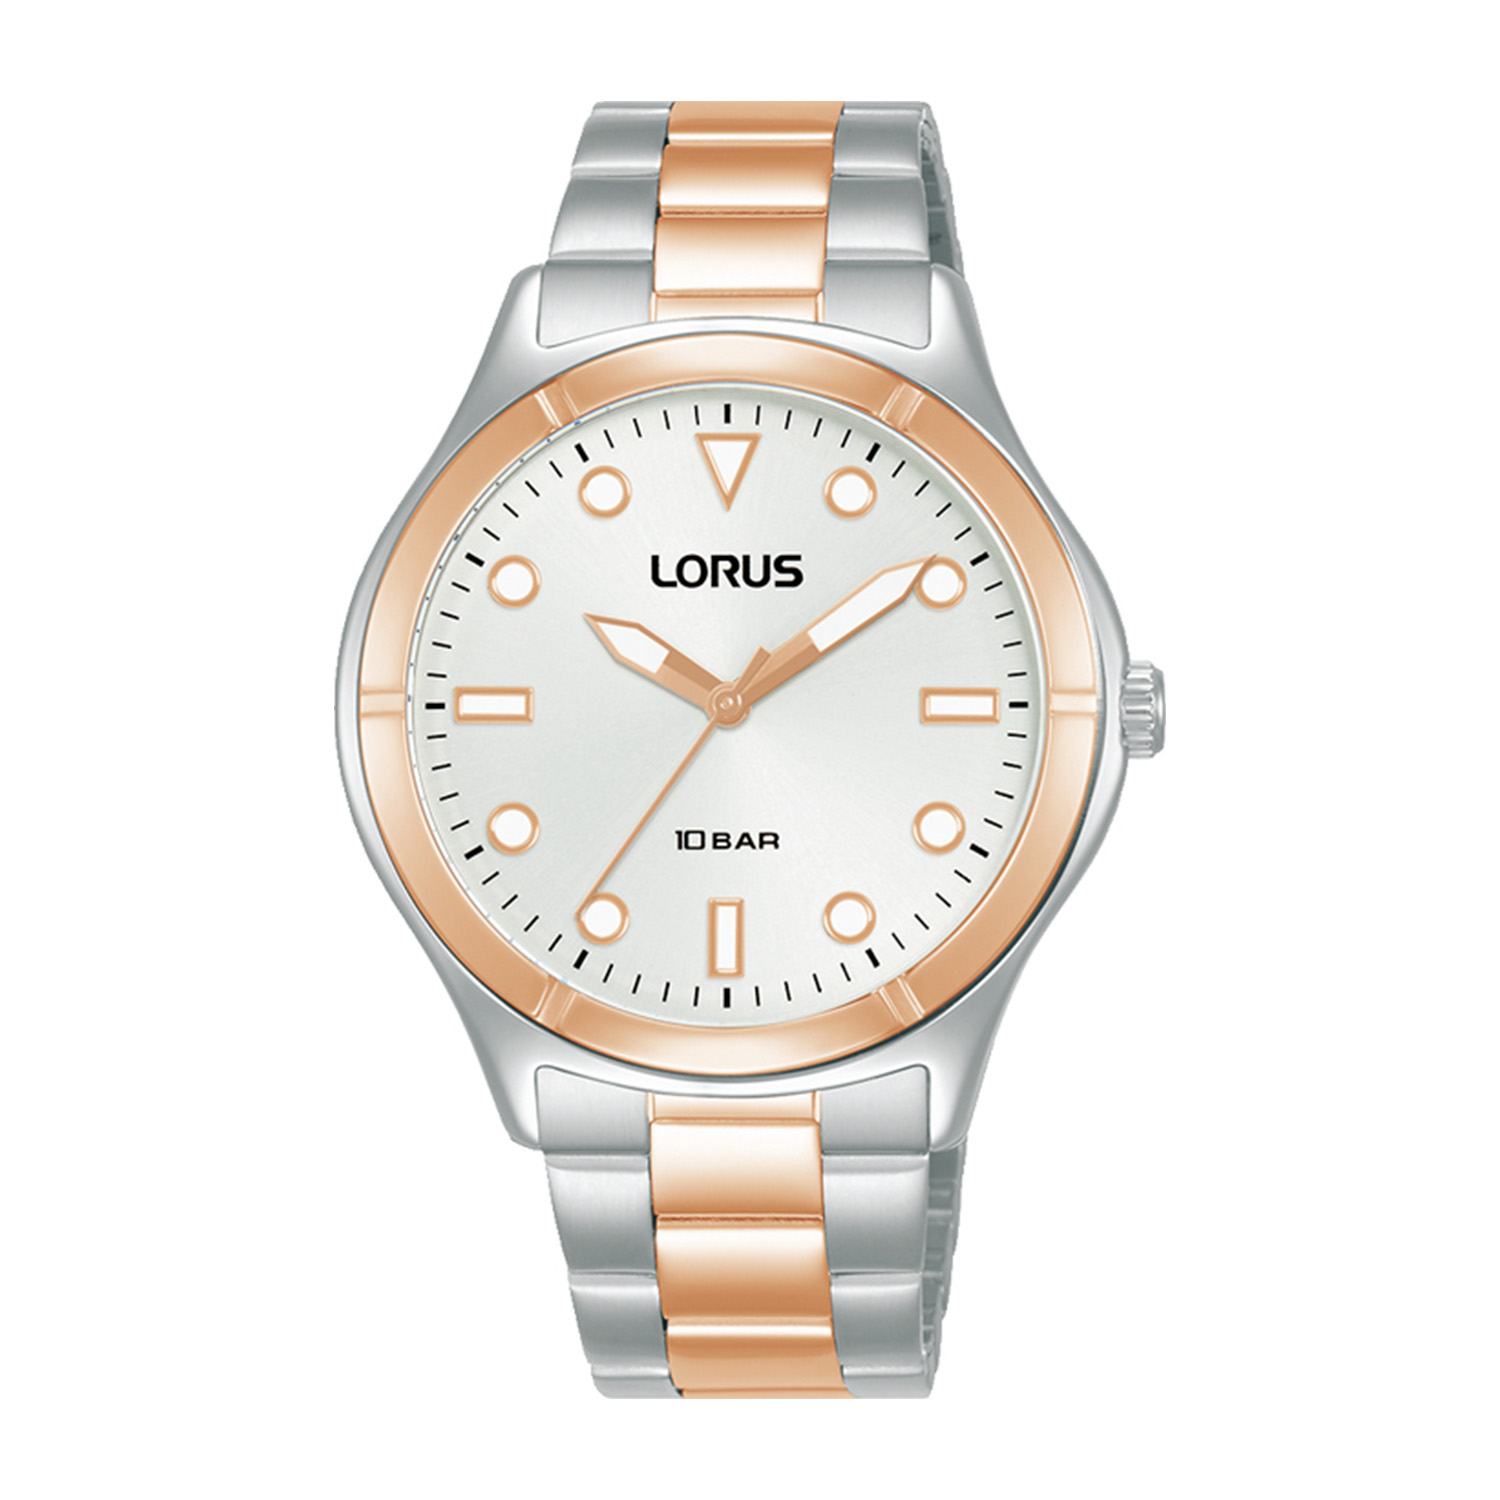 Womens watch LORUS made of silver and pink stainless steel with white dial and bracelet.